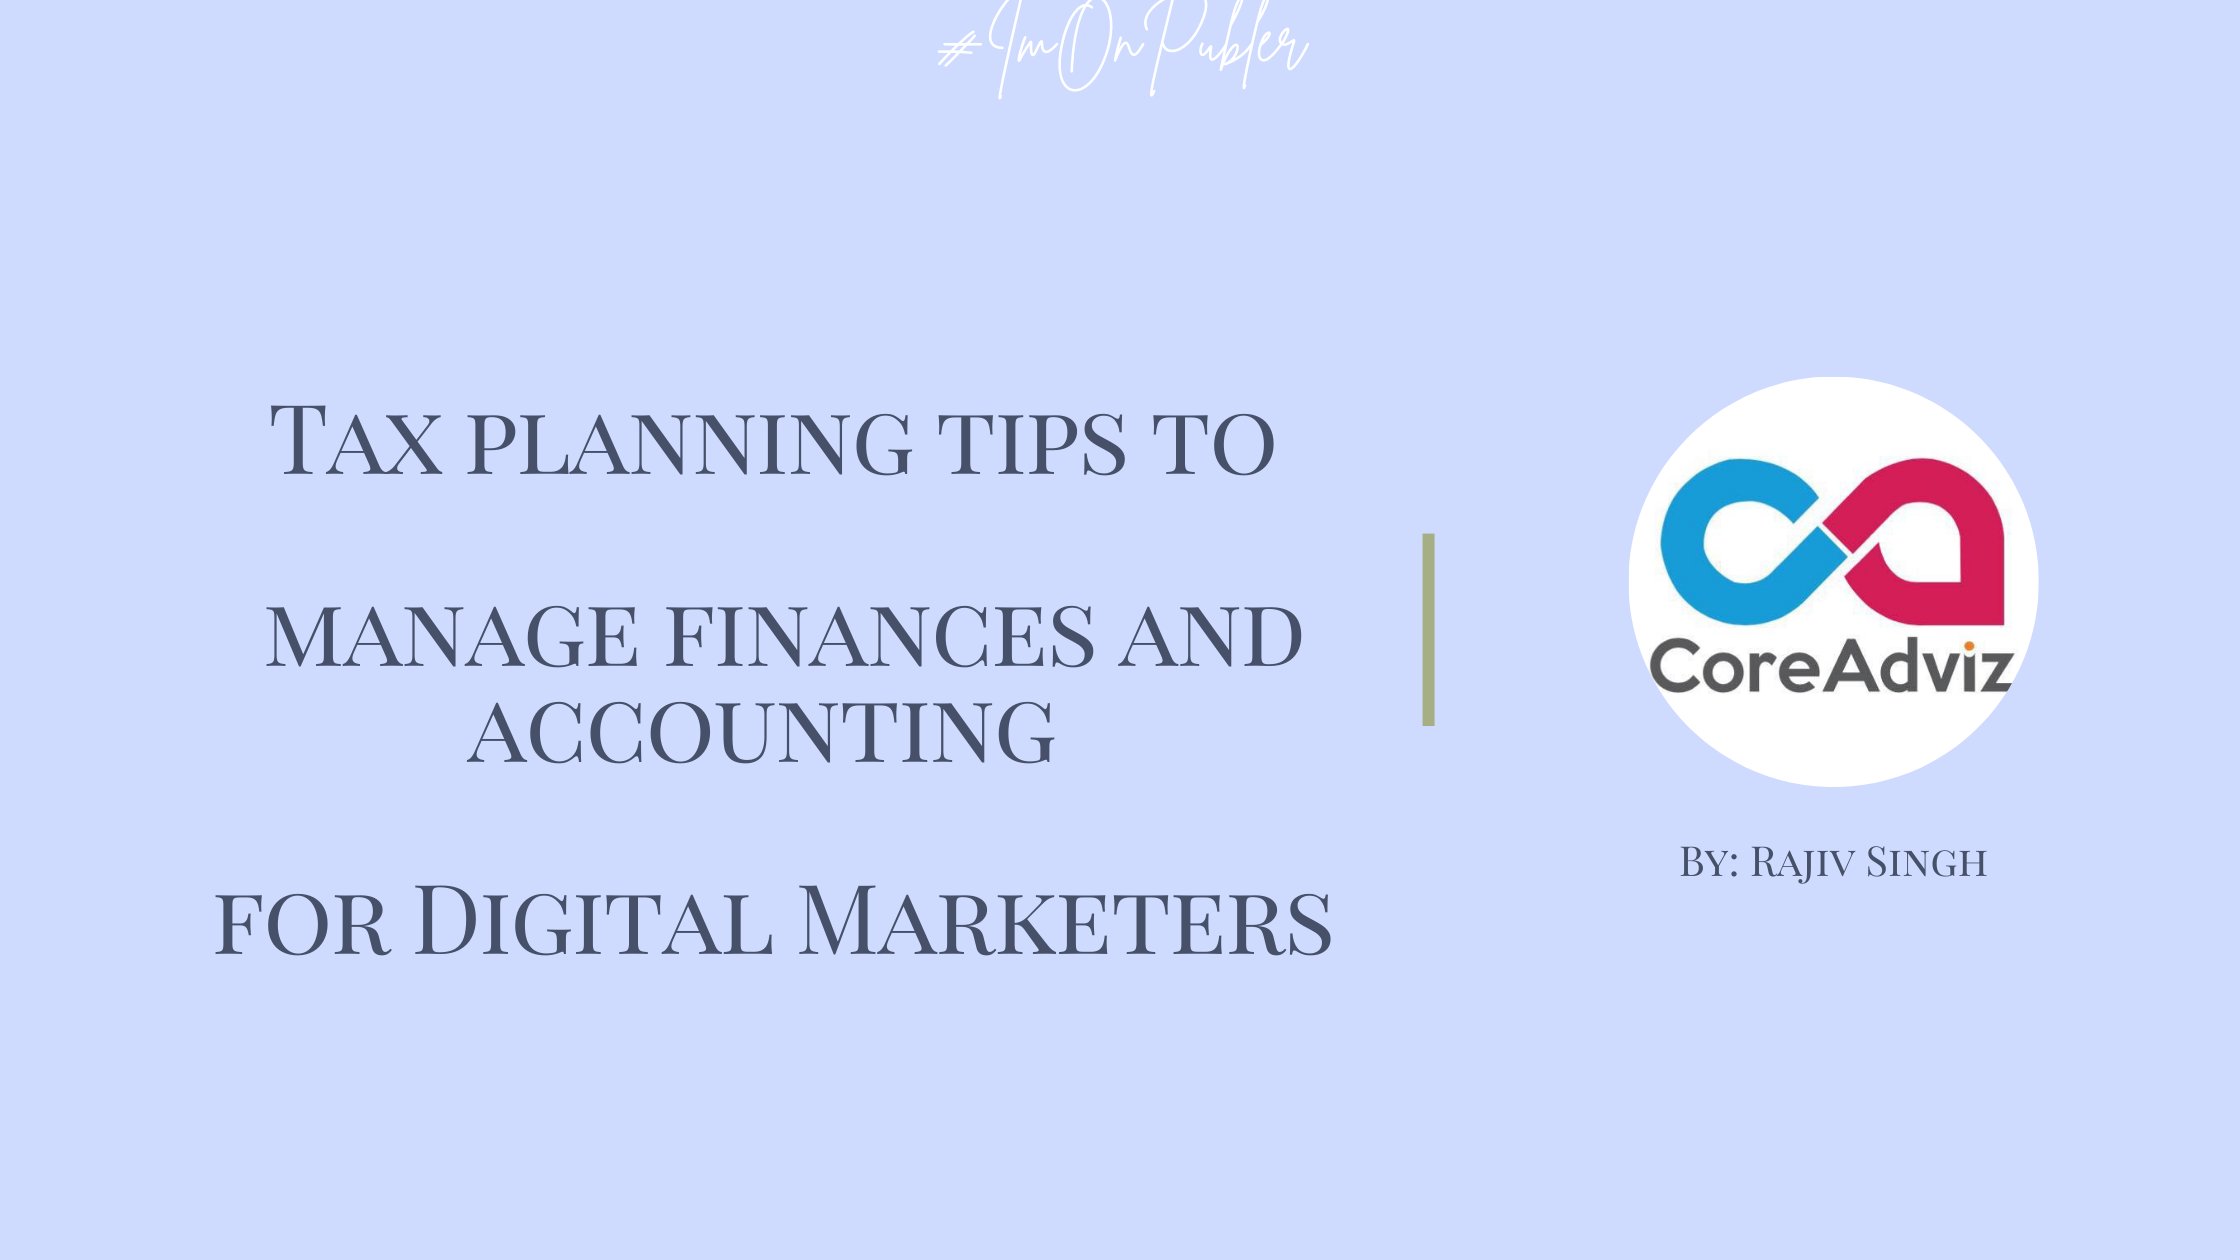 Tax planning tips to manage finances and accounting for Digital Marketers by Rajiv Singh